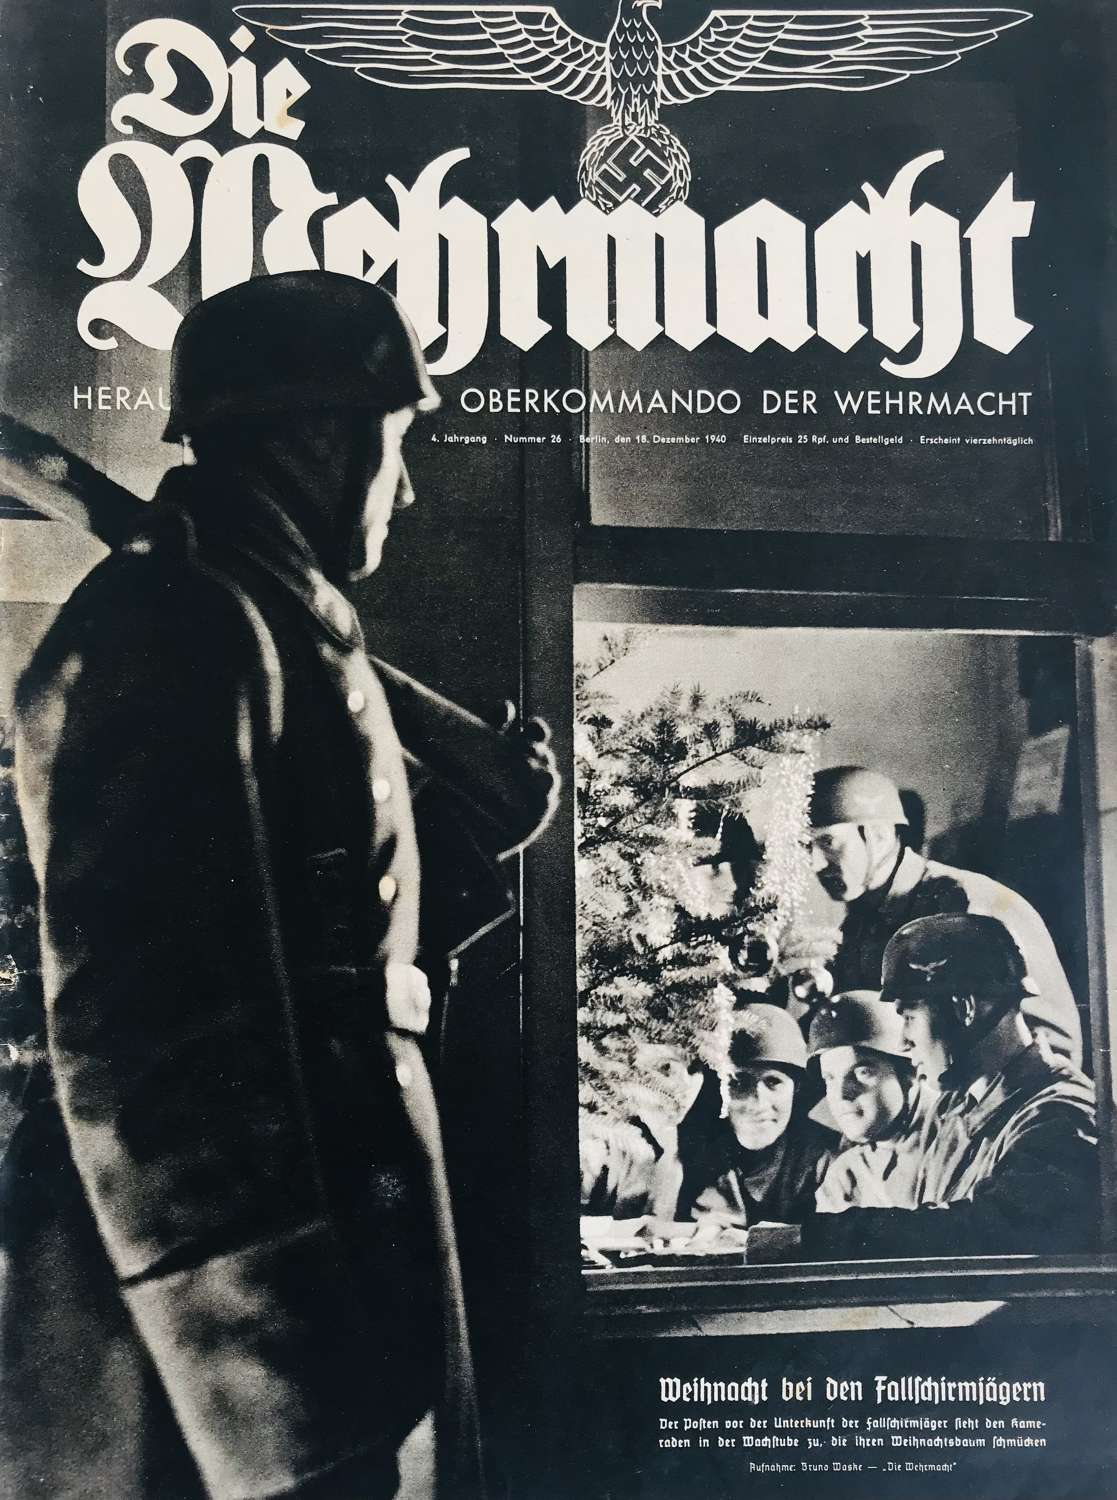 A copy of the Die Wehrmacht magazine dated, December 1940